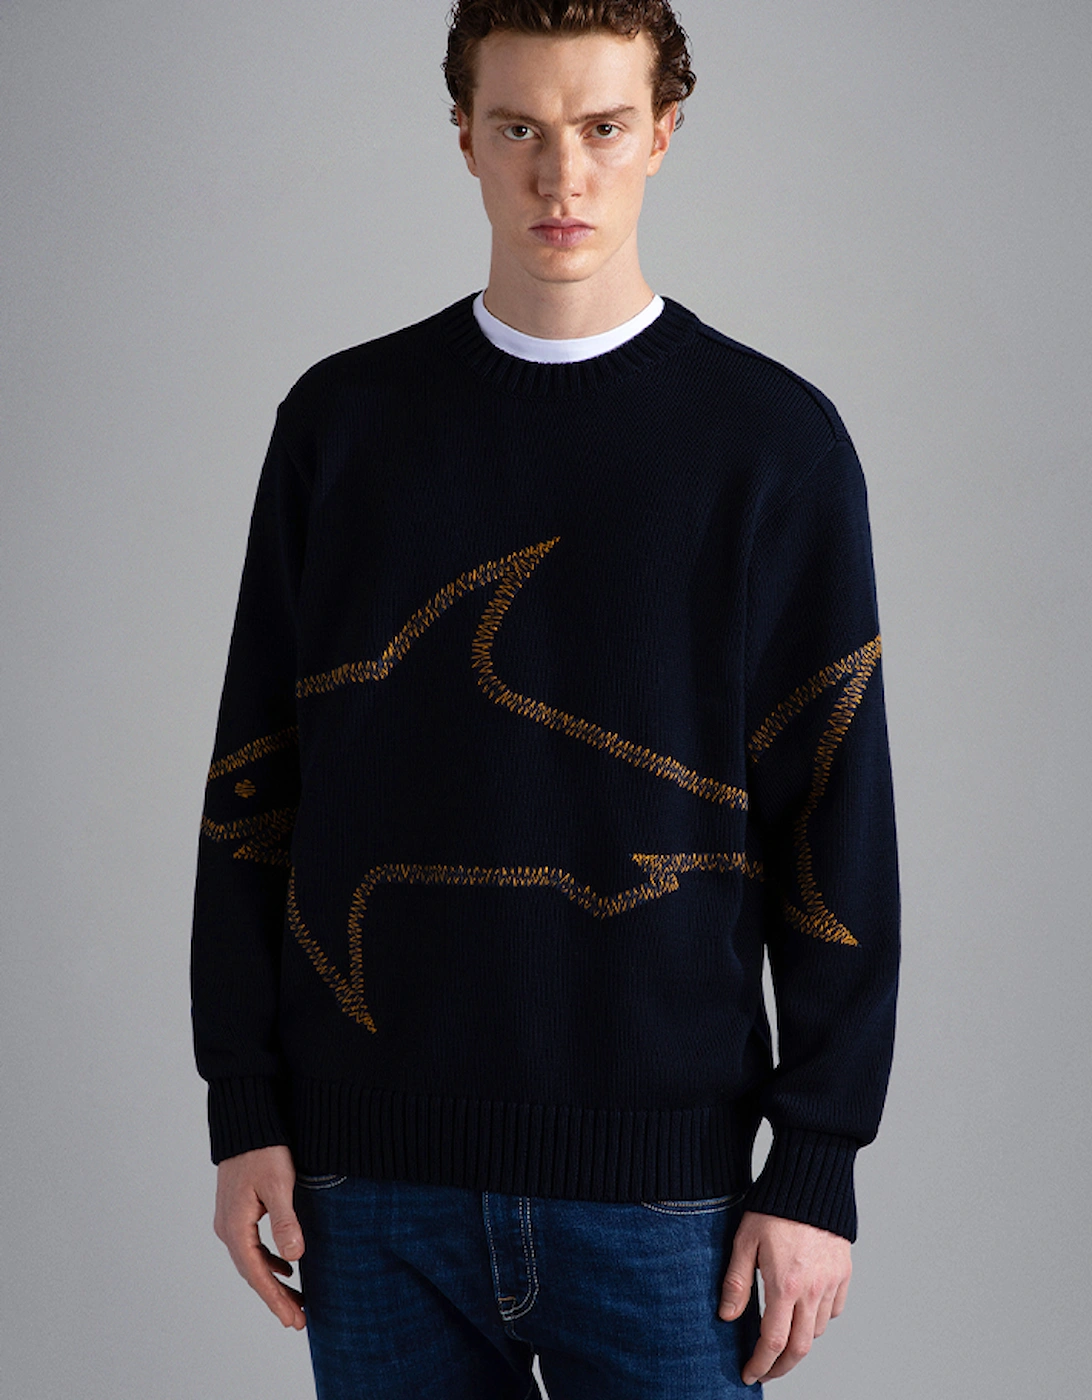 Men's Cool Touch Knitted Sweatshirt